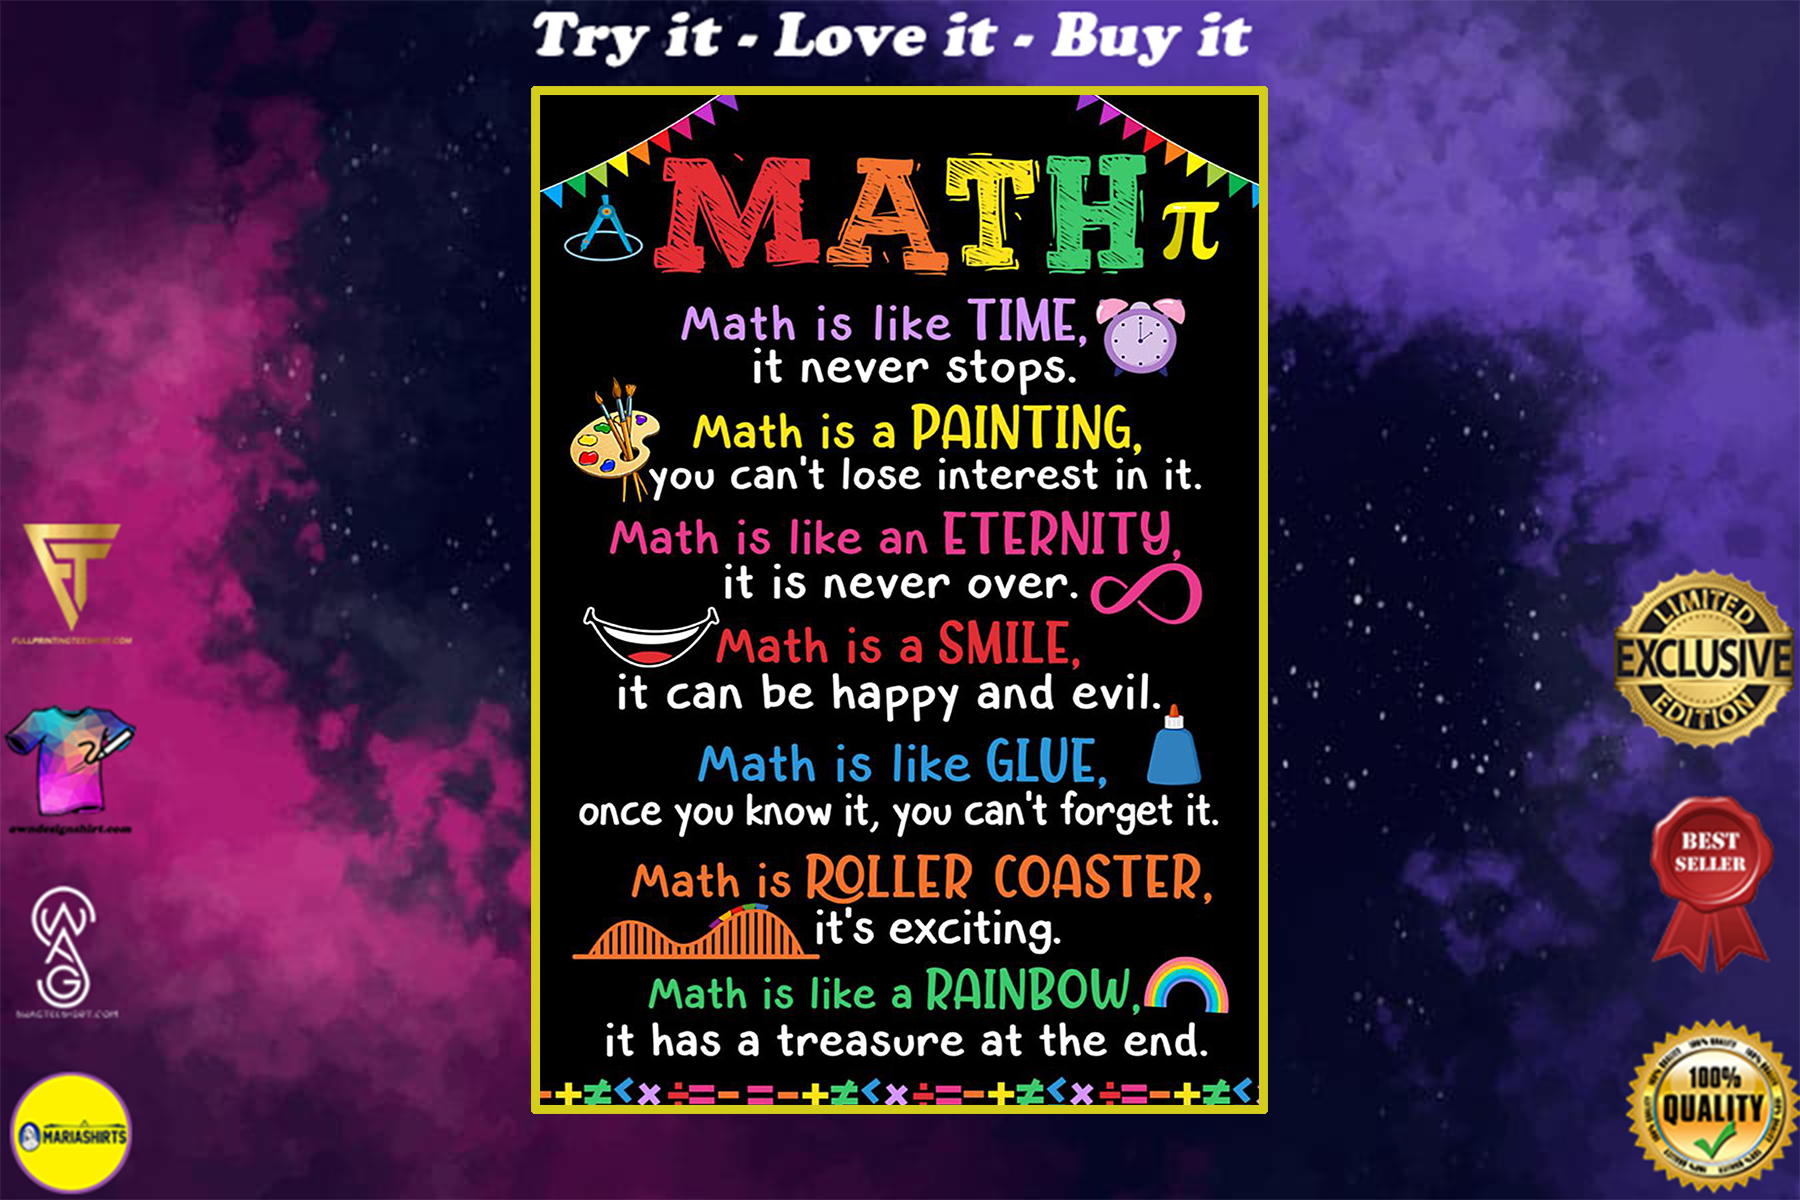 back to school math is like time it never stops poster